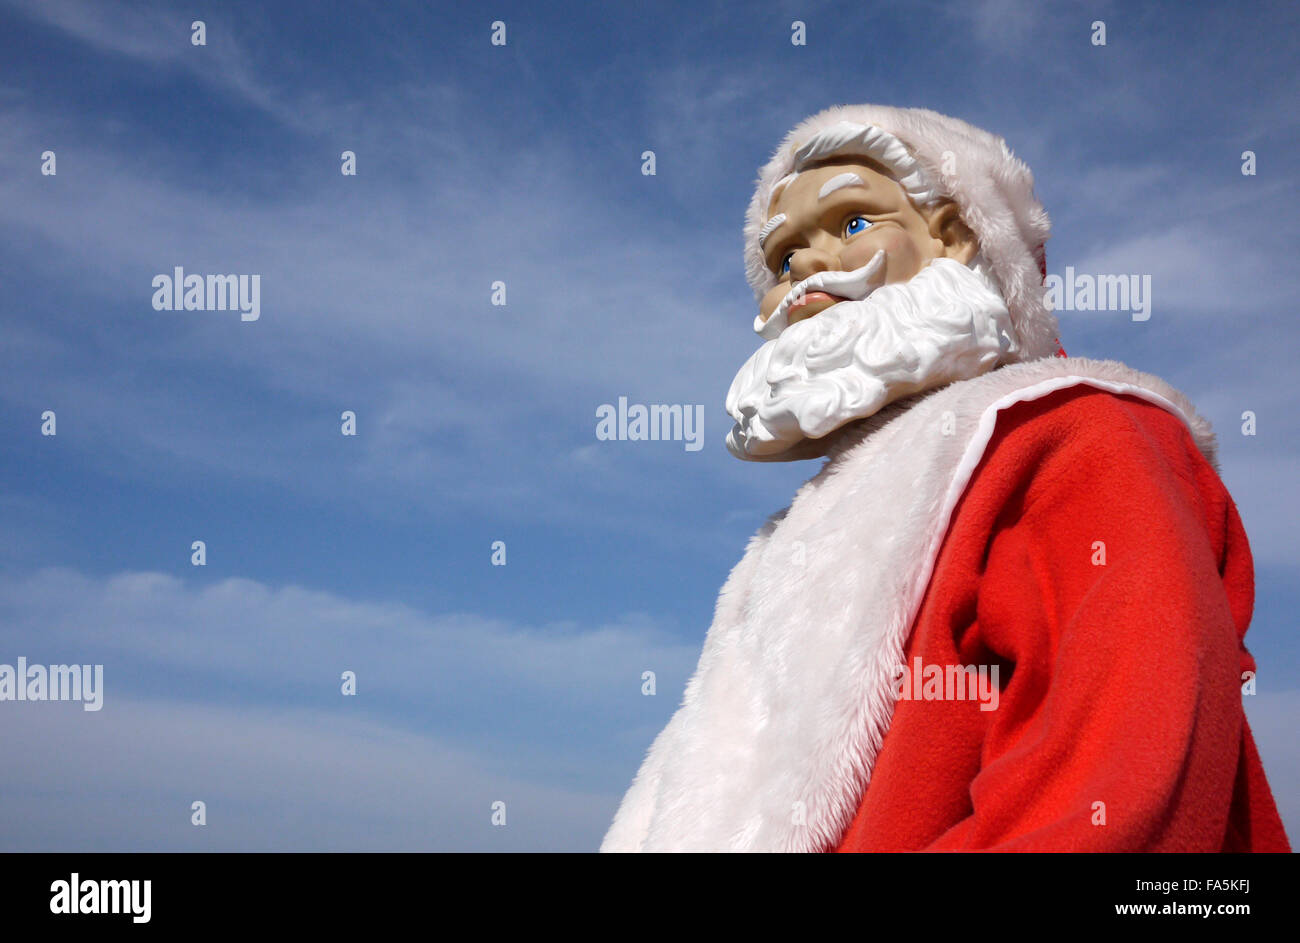 A Santa Claus manikin with a frowning worried apprehensive looking expression pictured outdoors under a blue sky Stock Photo